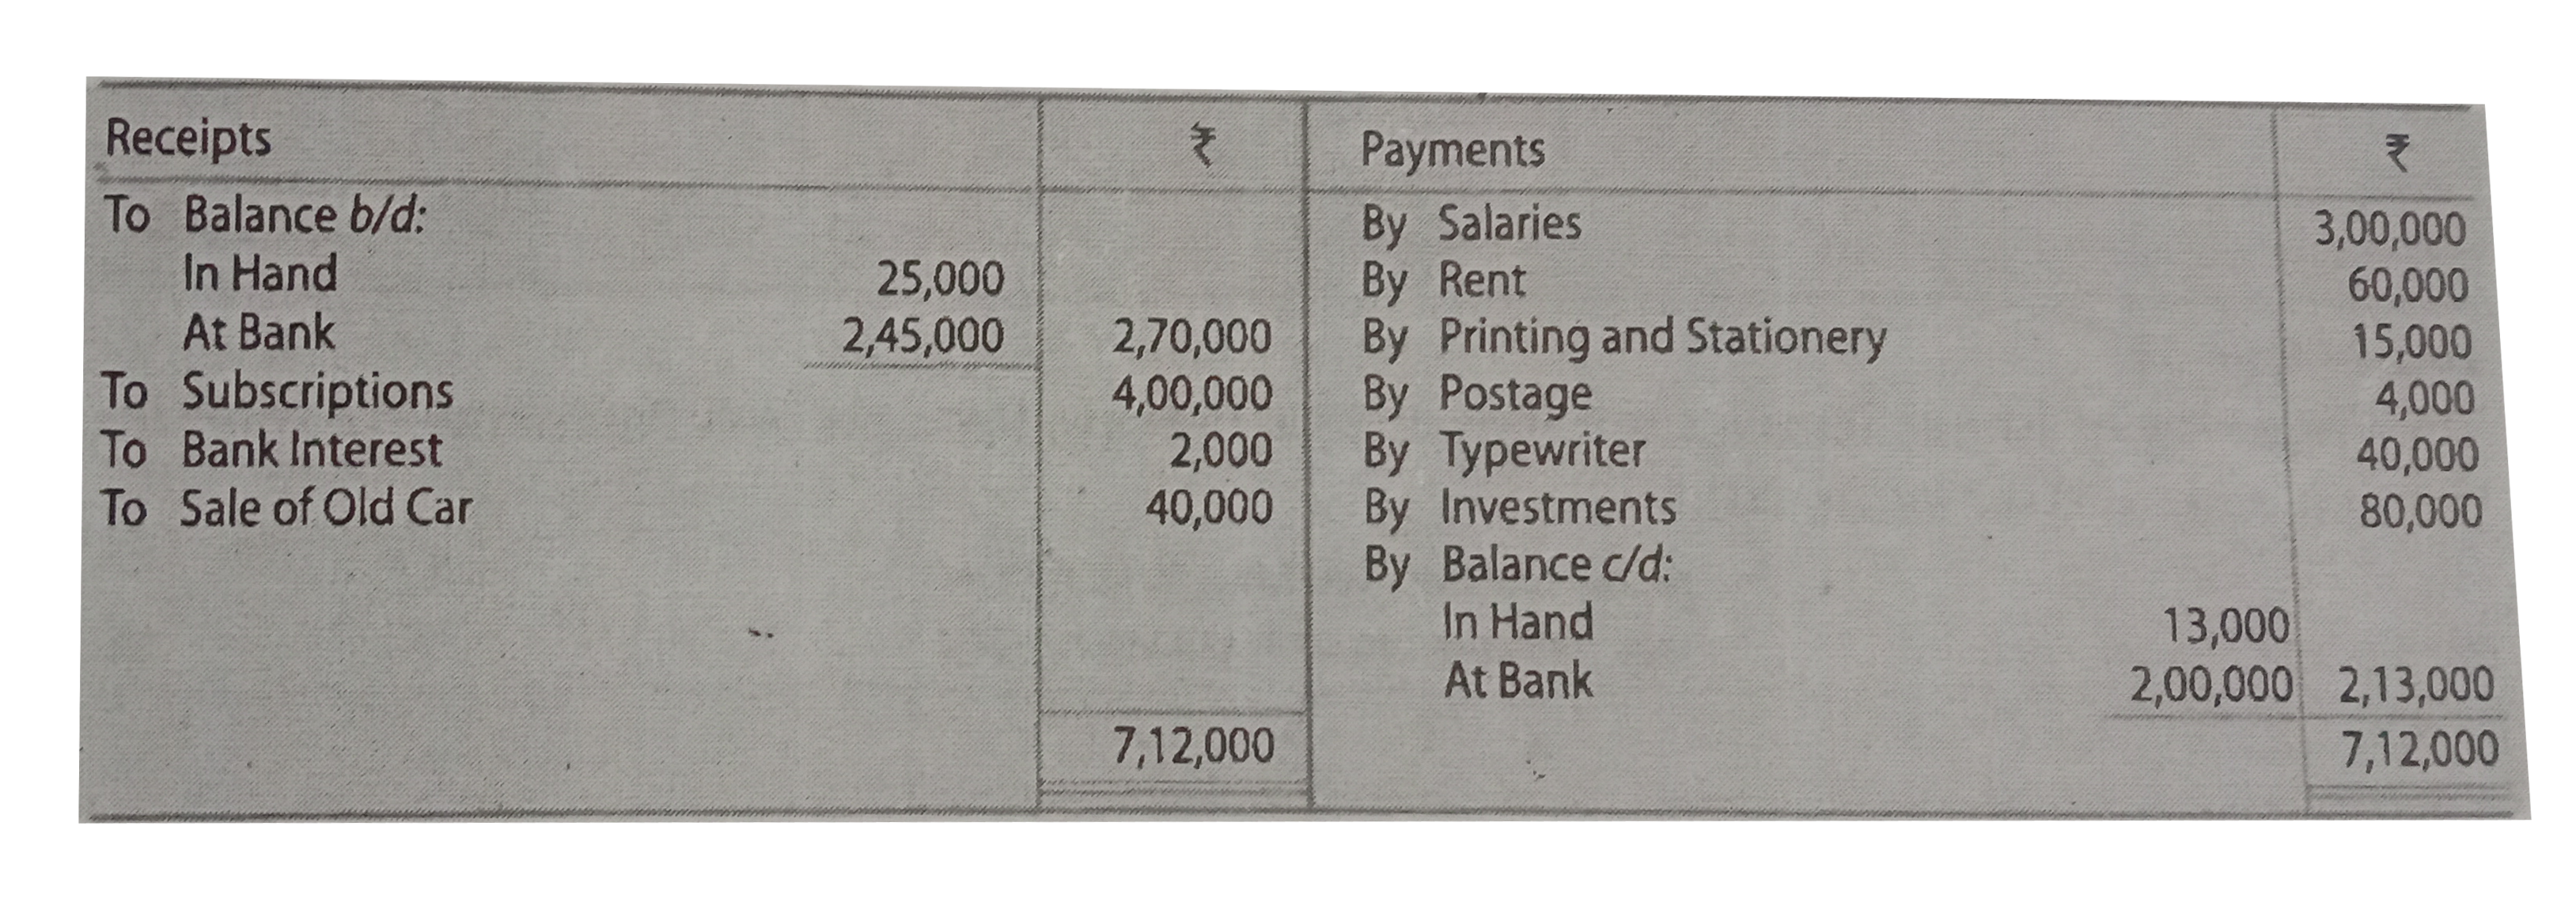 following is the Receipts and Payments Account of Indian Youth Association for the year ended 31st March 2019 :      Investments were made on 1st October 2018 earning interest